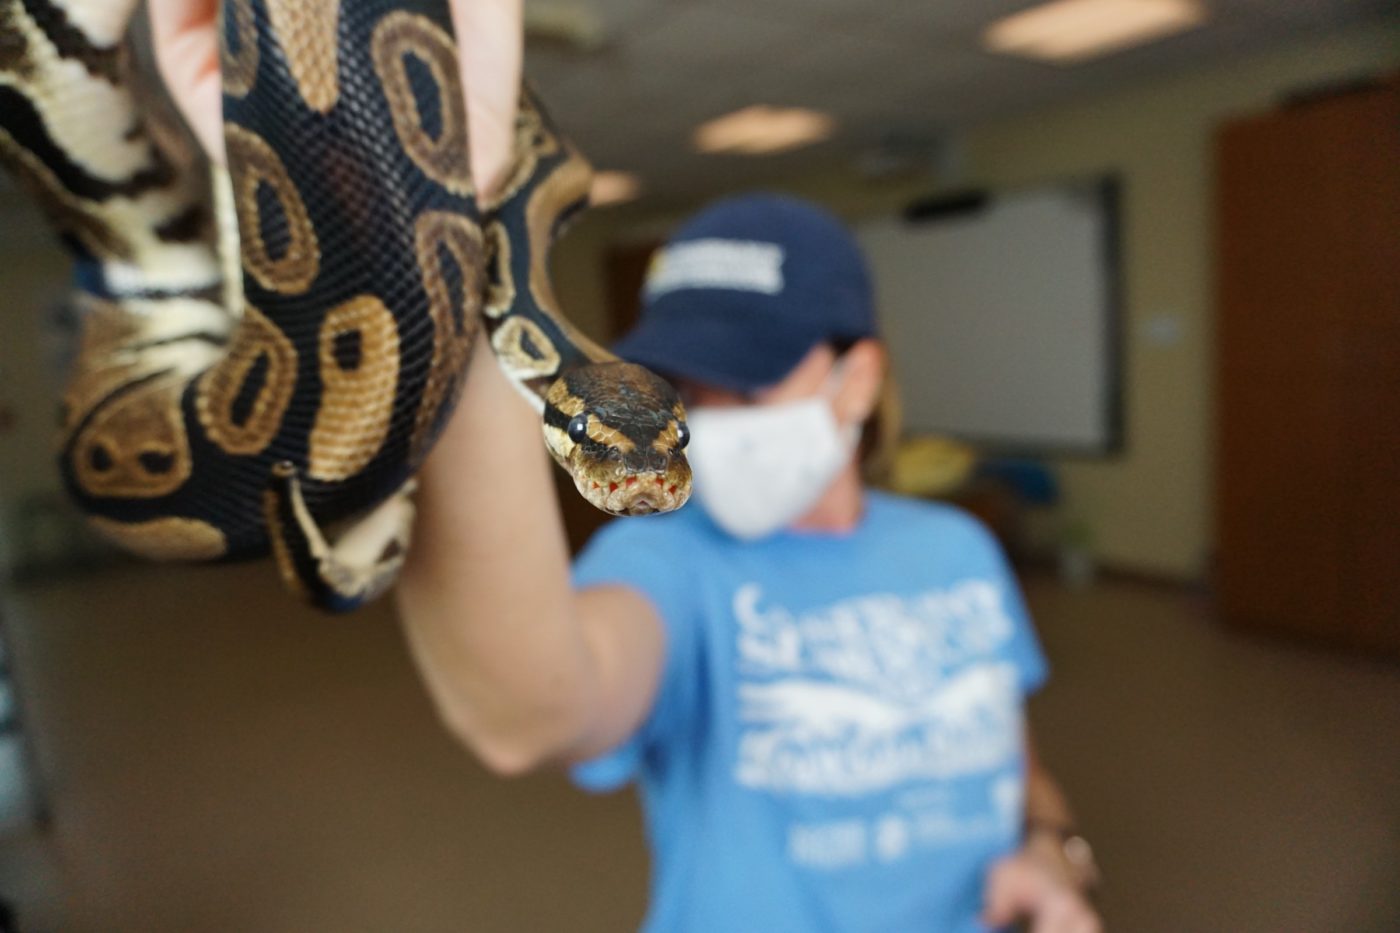 Monty, the Conservancy’s ball python animal ambassador meets students during a live virtual animal encounter